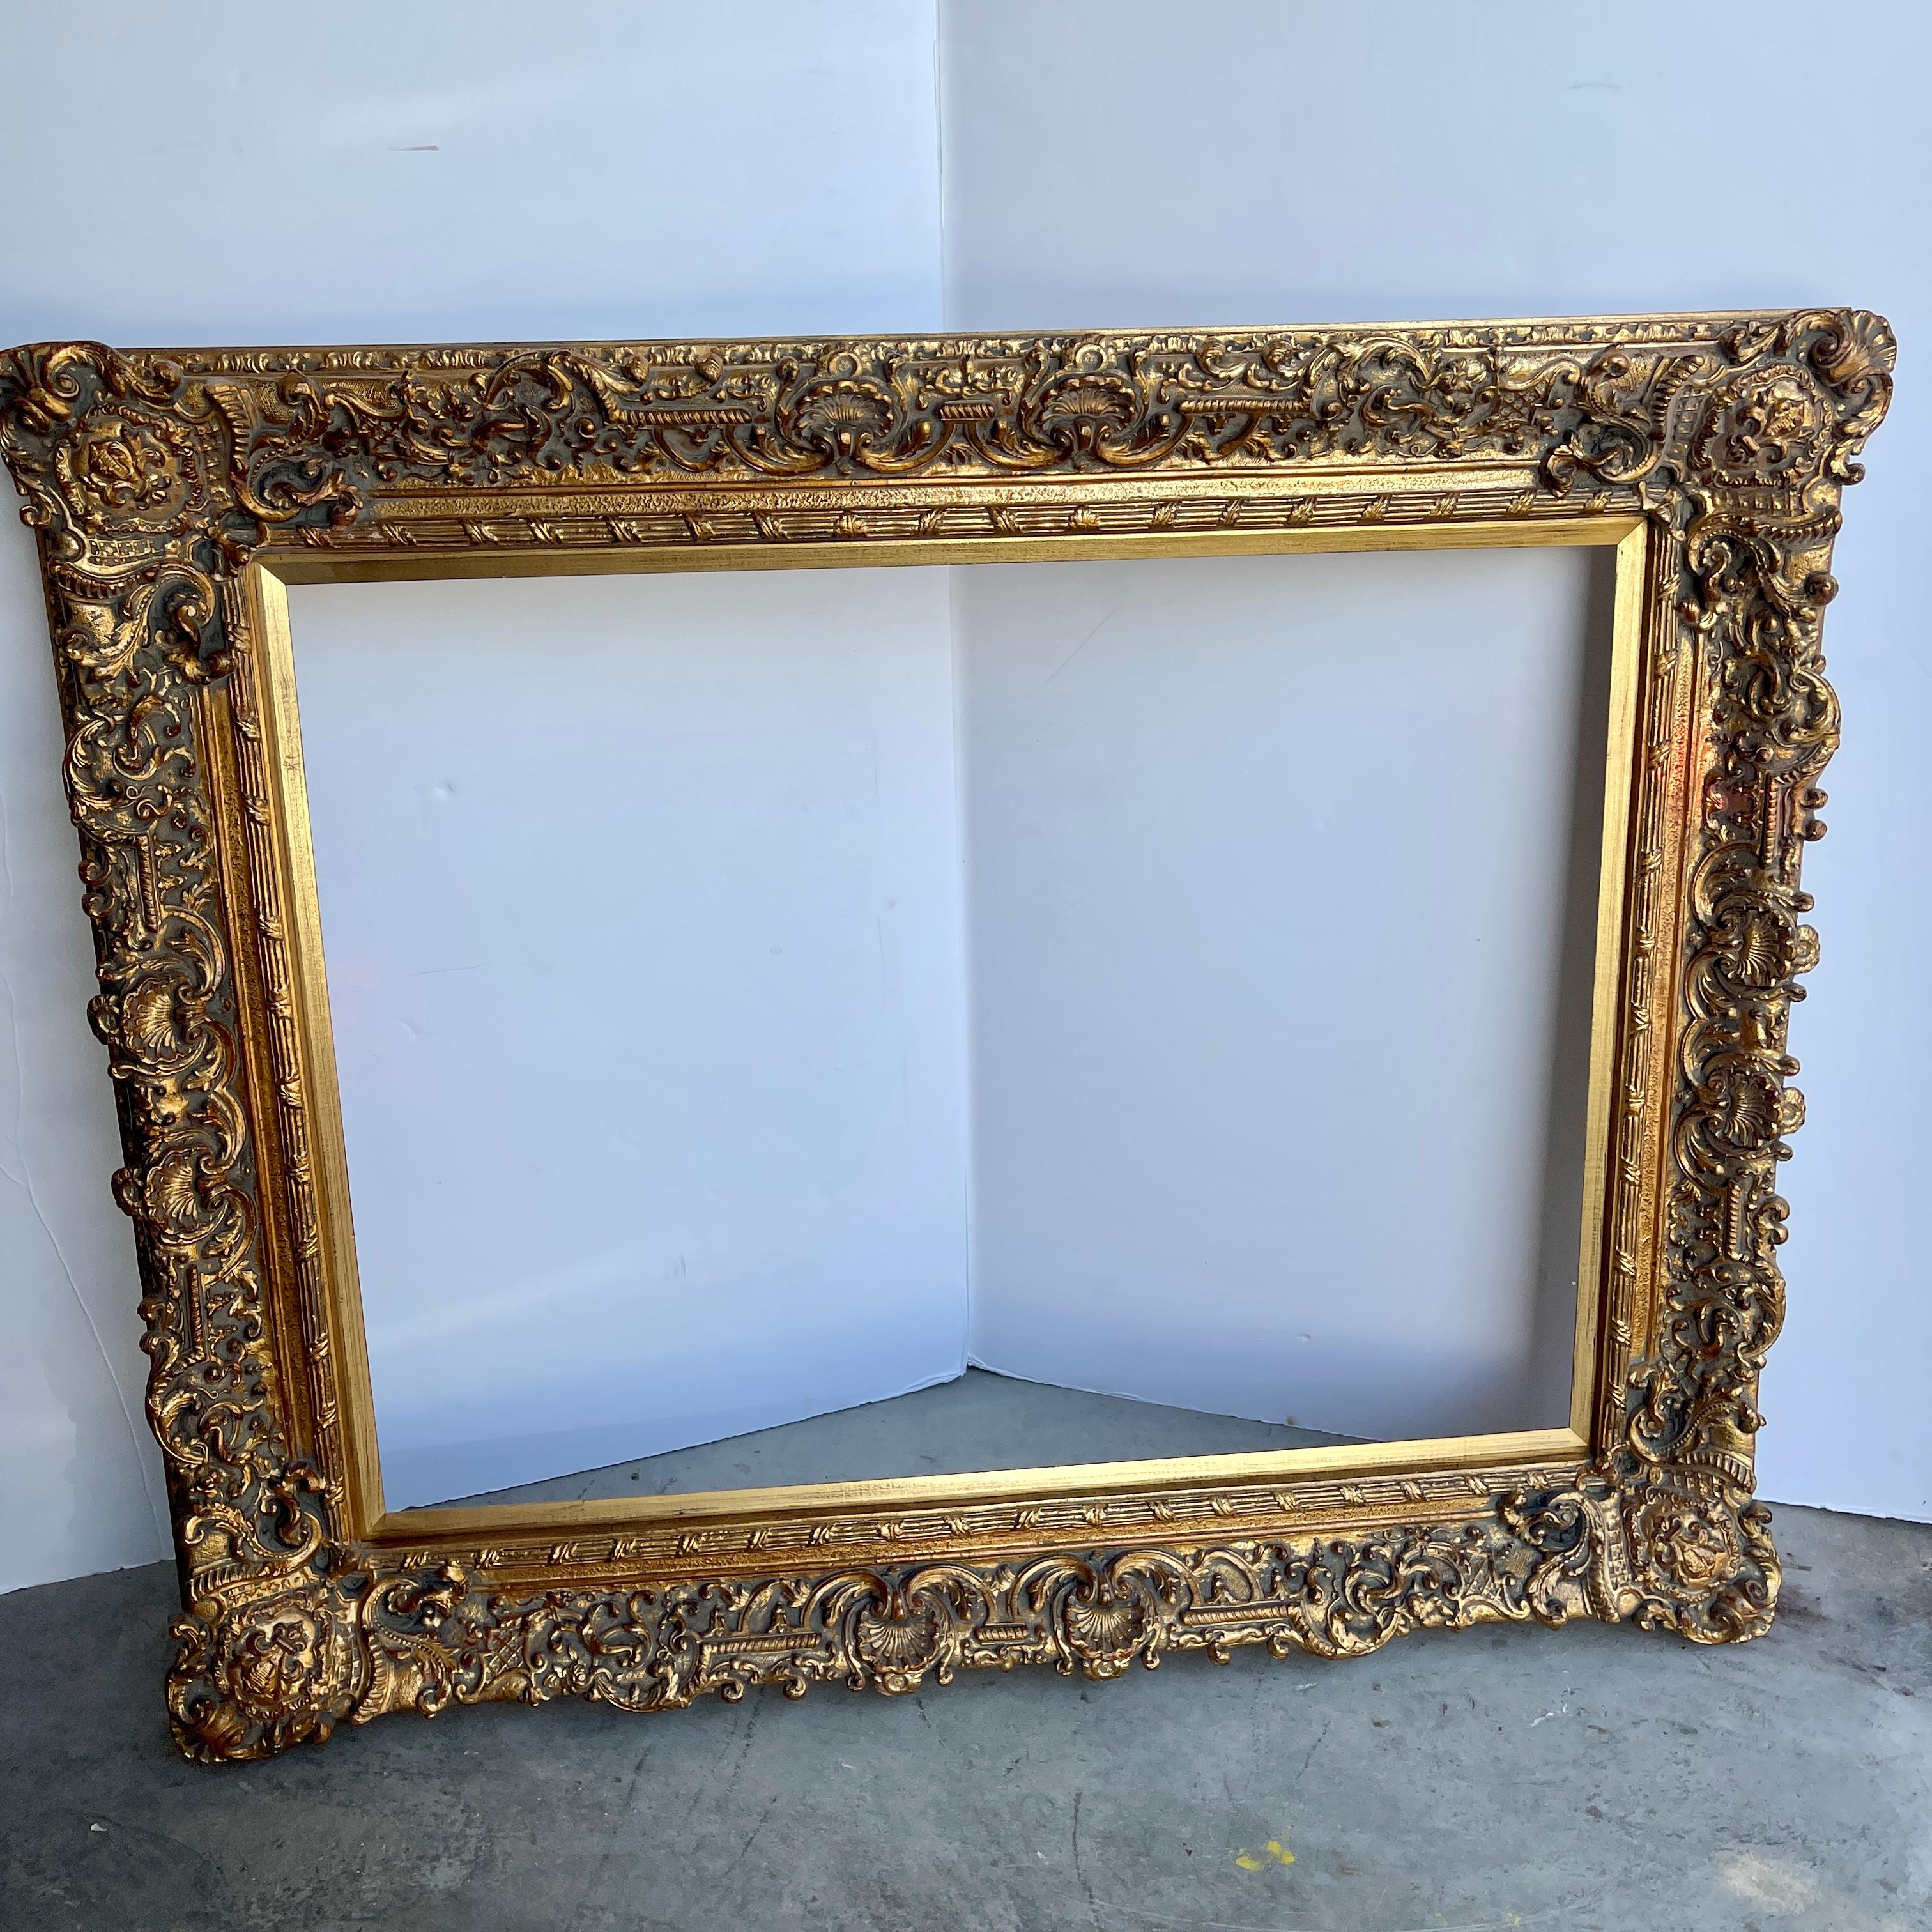 Gesso 20th Century Large Ornate Carved Gilt Wood Frame, French Rococo Style  For Sale